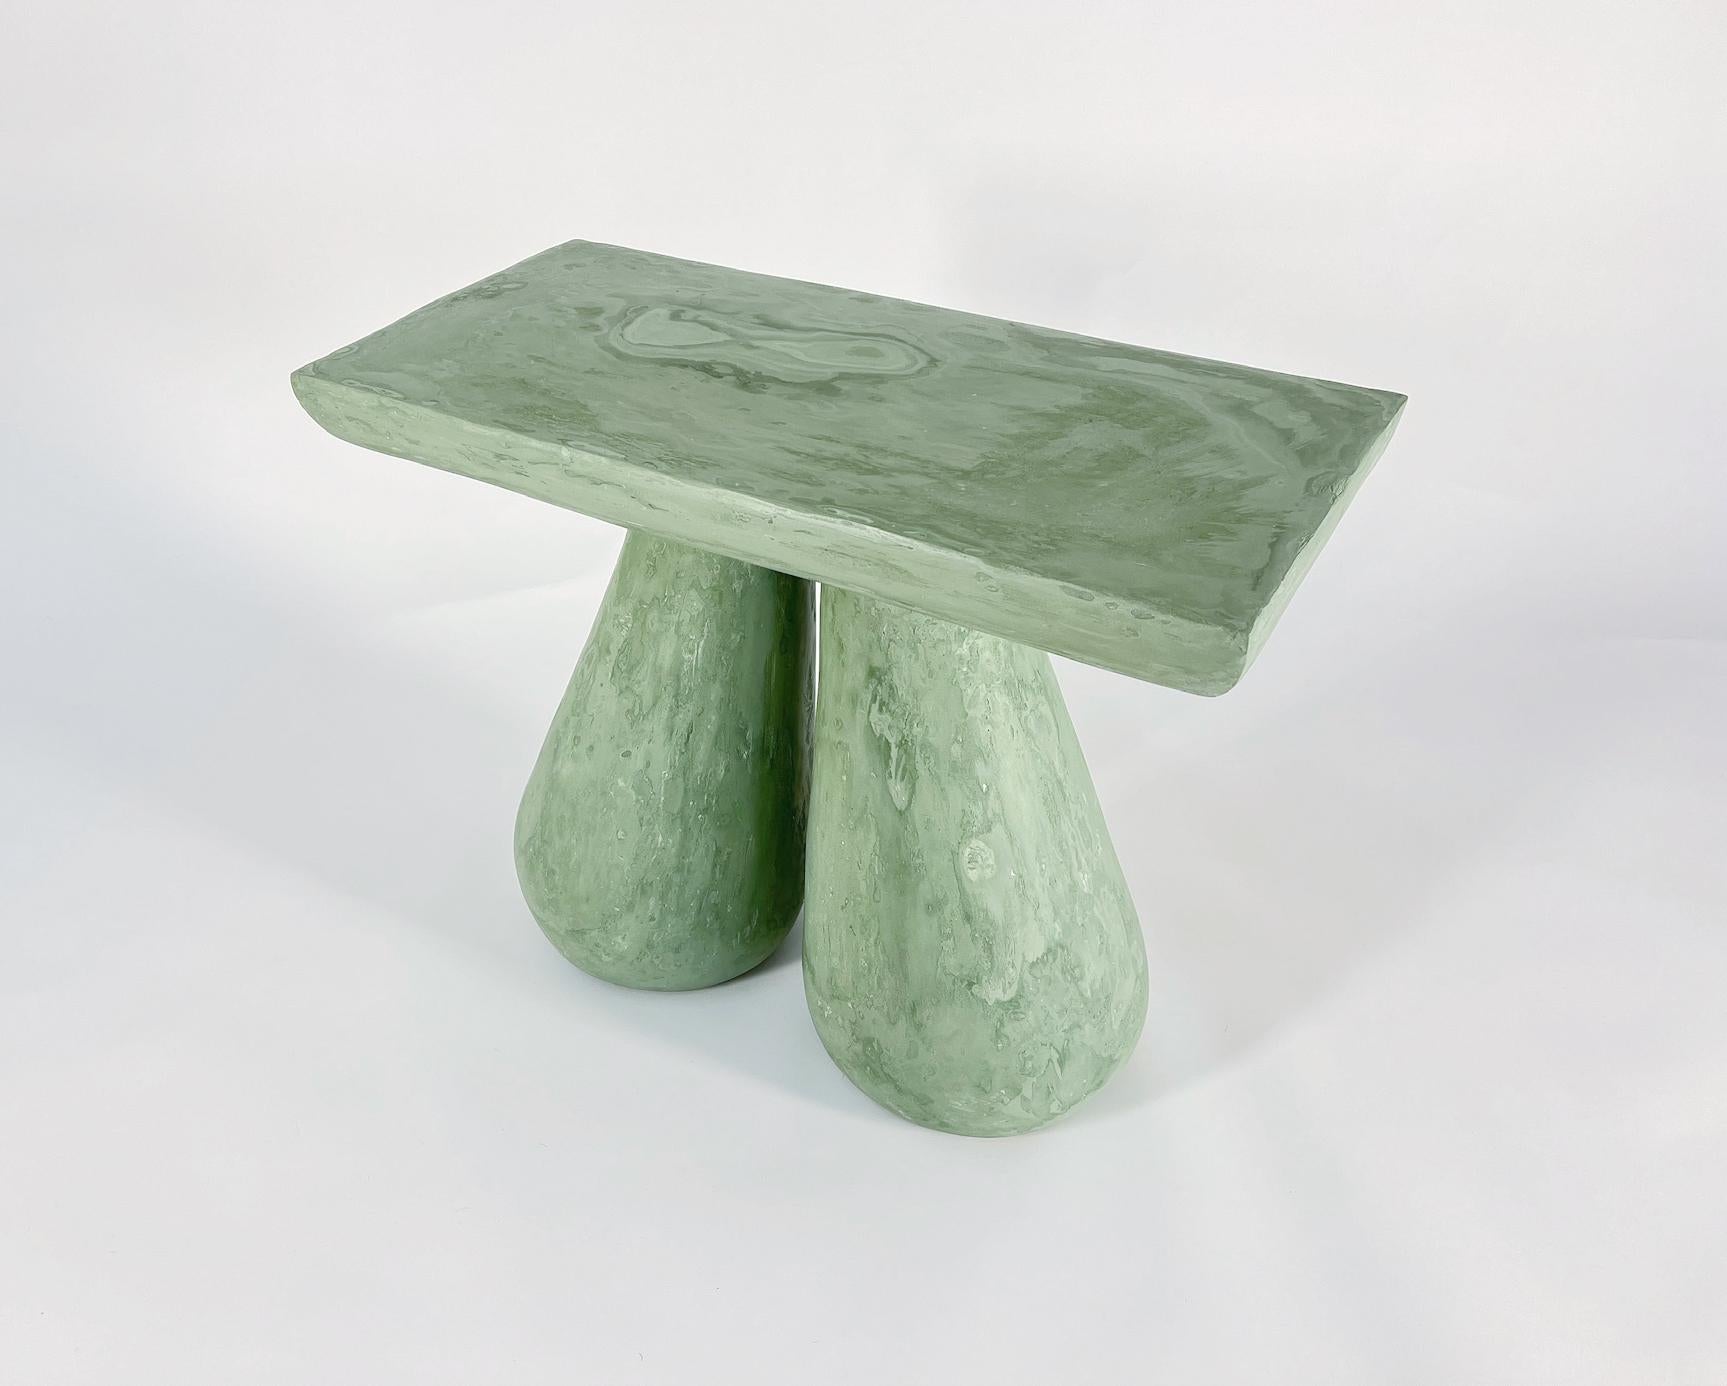 Hand-Crafted Erika Mini Table - Modern Hand Crafted Plaster Table by Artist Gabriel Anderson For Sale